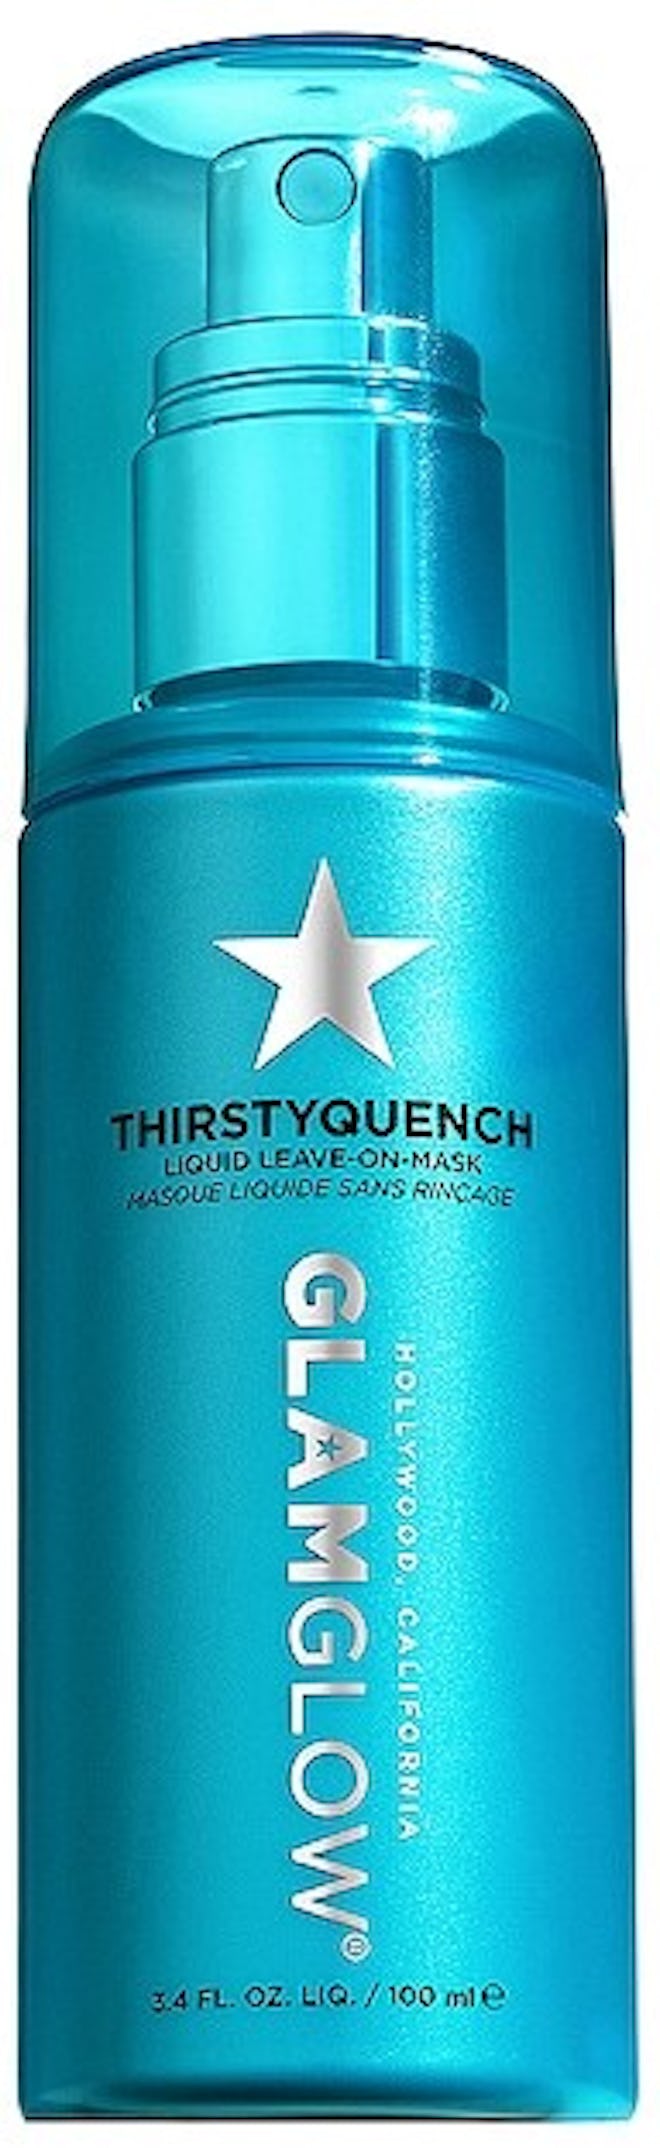 Glamglow THIRSTYQUENCH Liquid Leave-On Mask